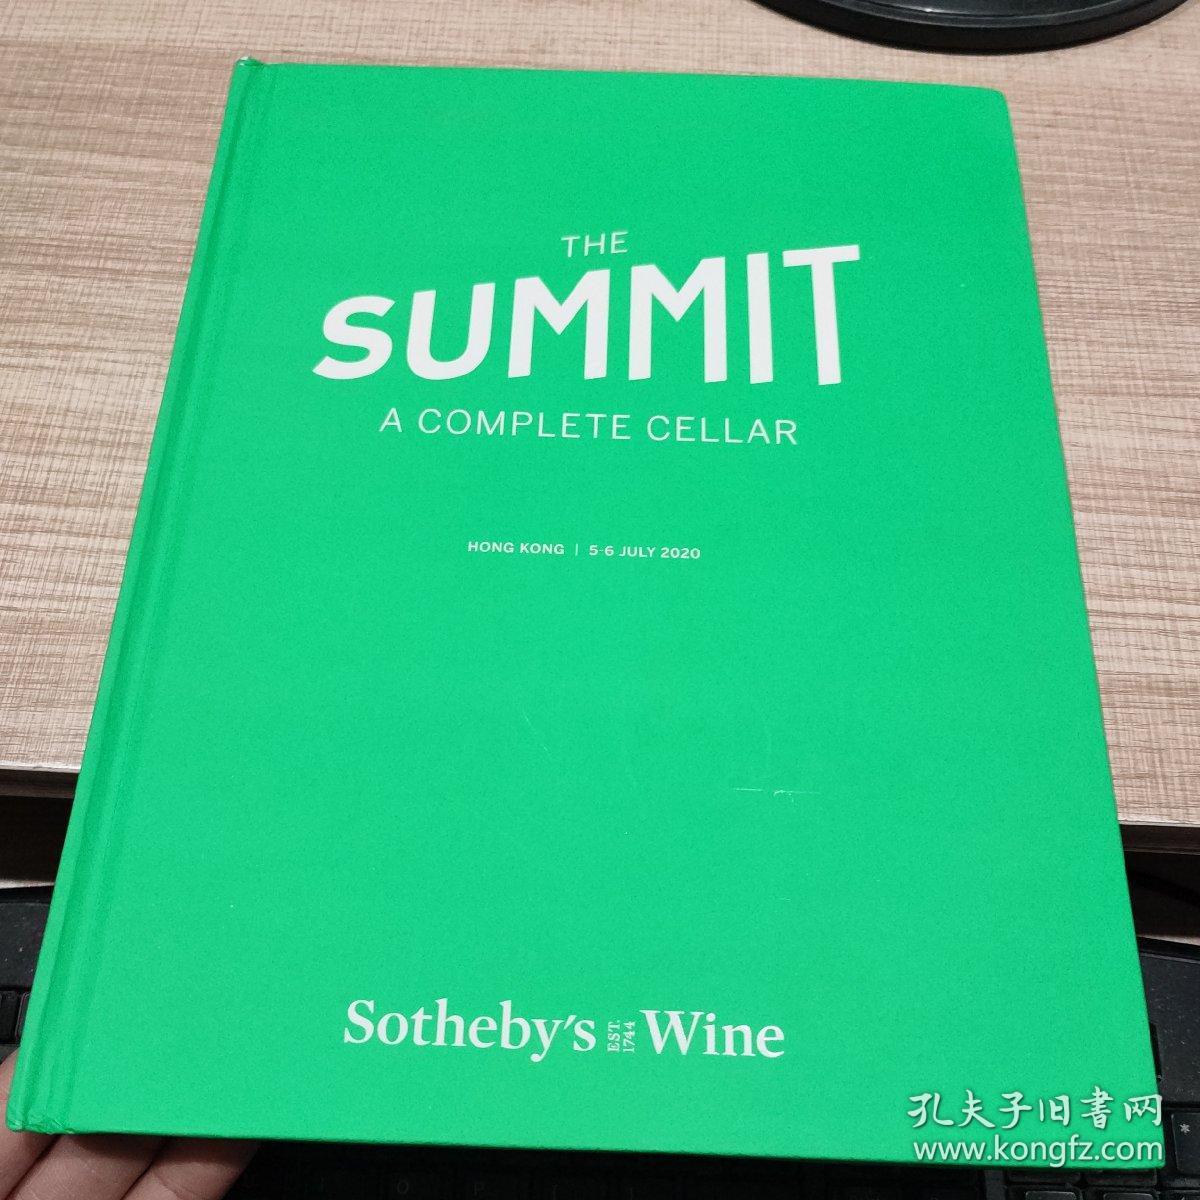 THE  SUMMIT A COMPLETE CELLAR  SOTHEBY'S WINE